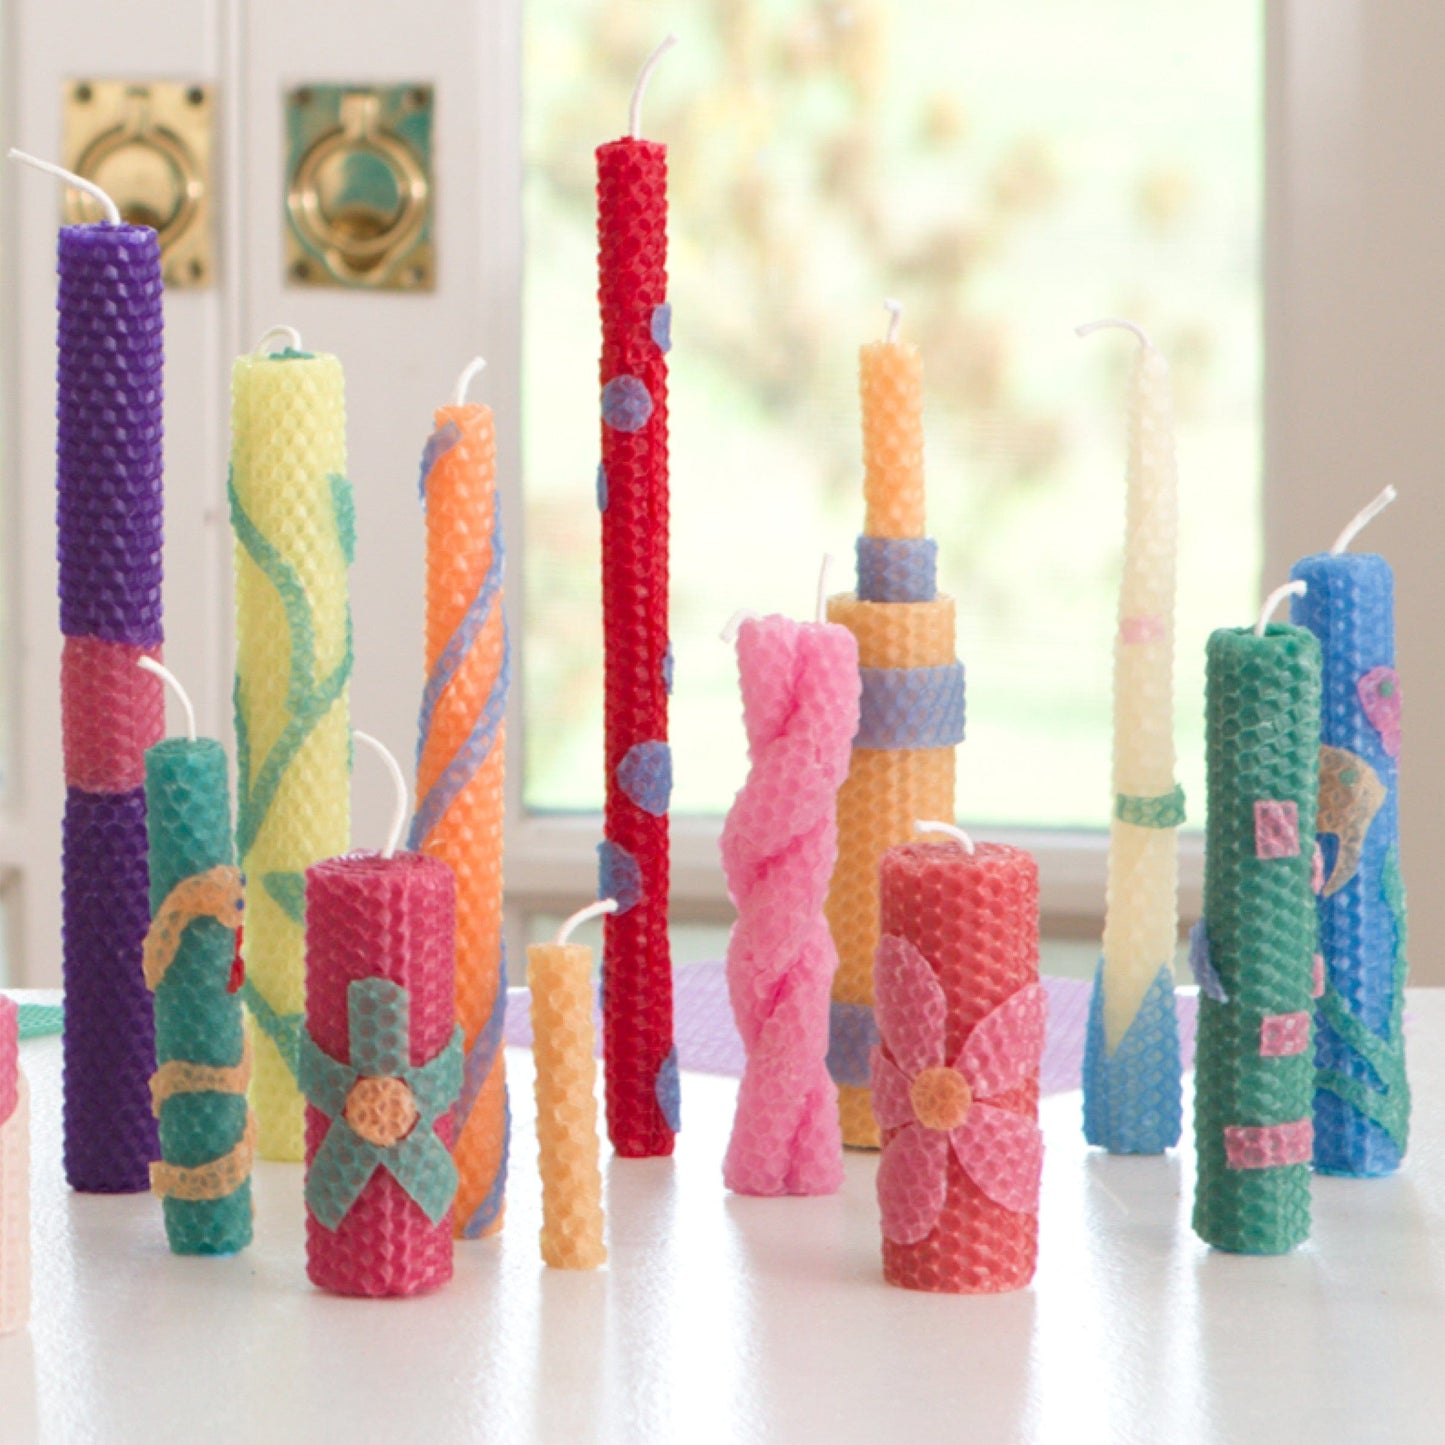 How to Make Beeswax Candles from Sheets (EASY) 